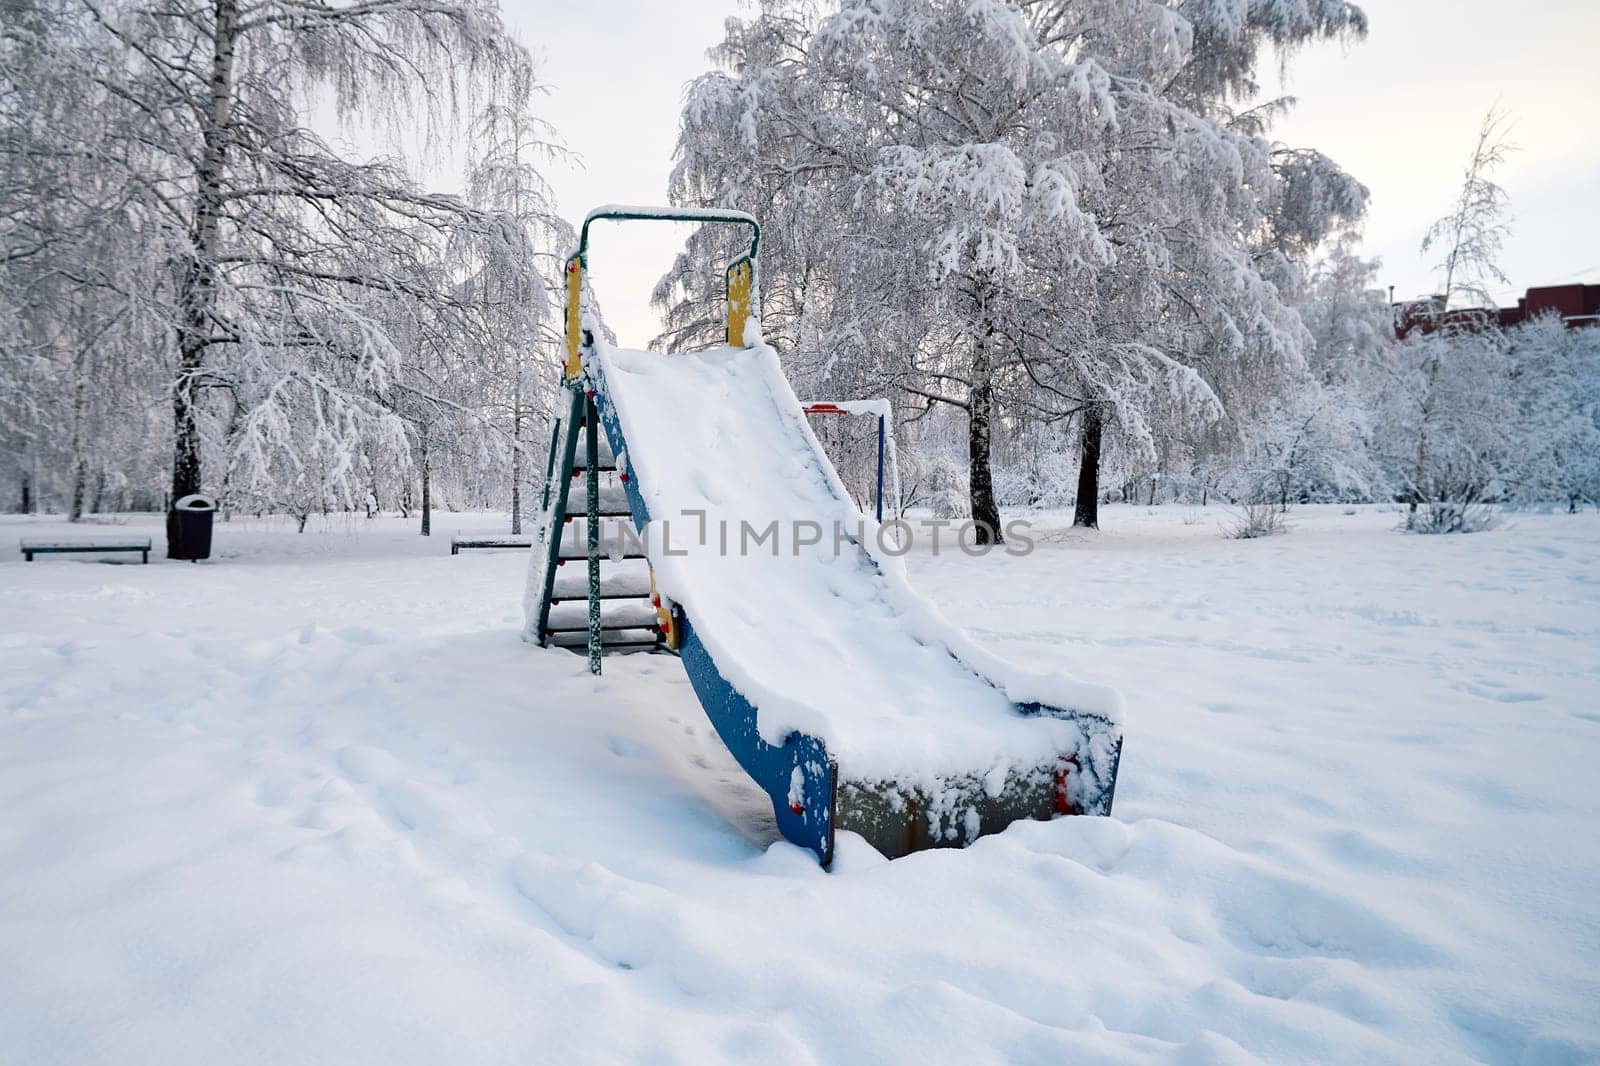 Children's slide in the park covered with snow